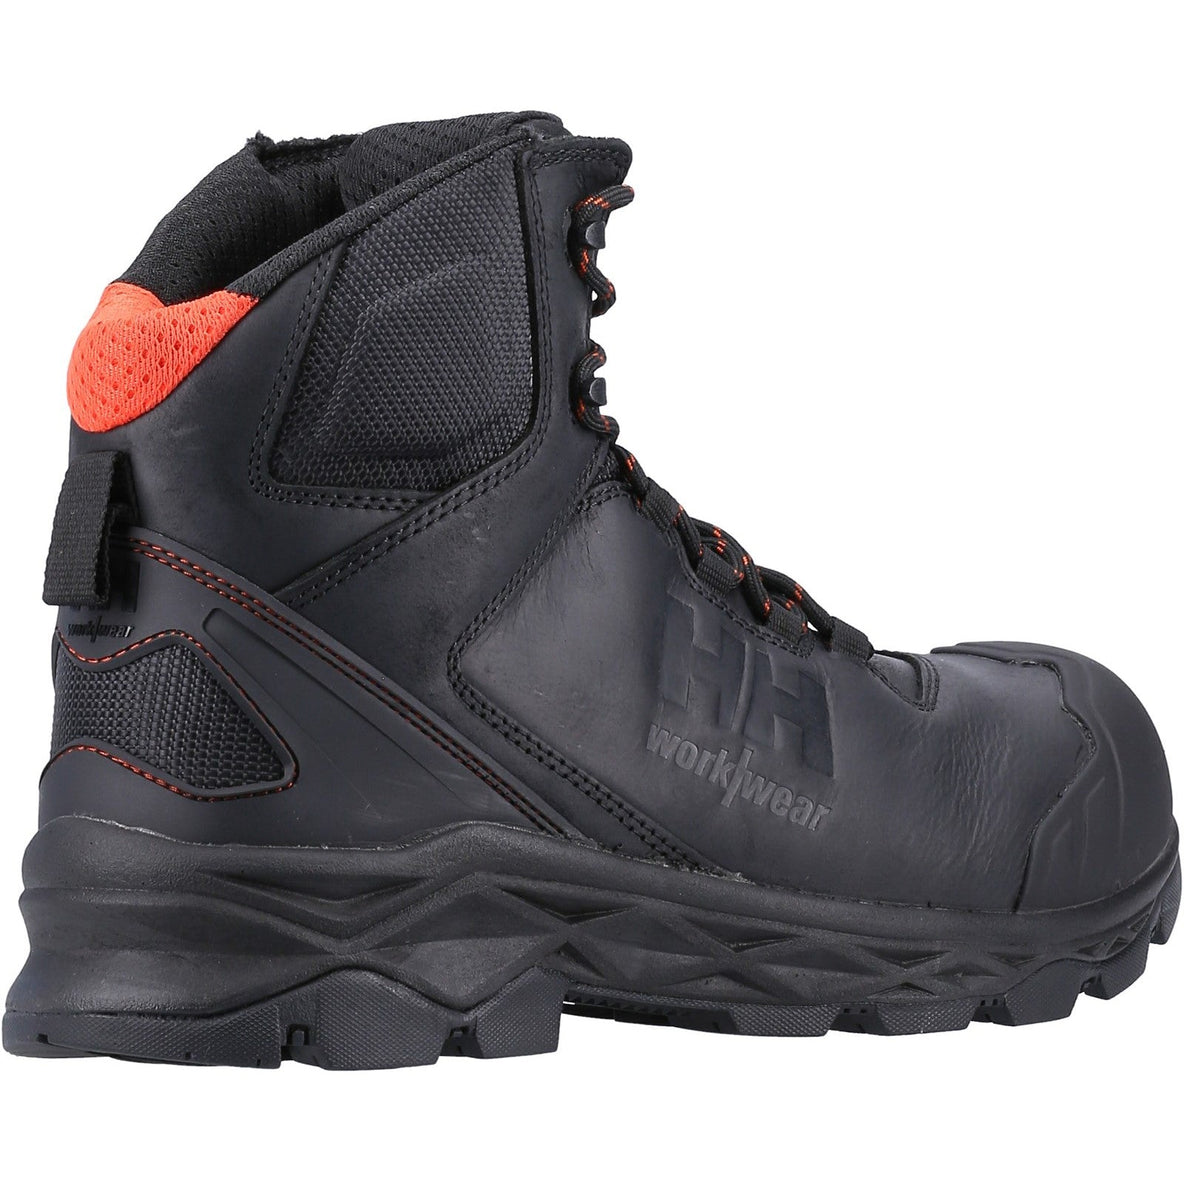 Helly Hansen Oxford Mid S3 Safety Boot in Black 